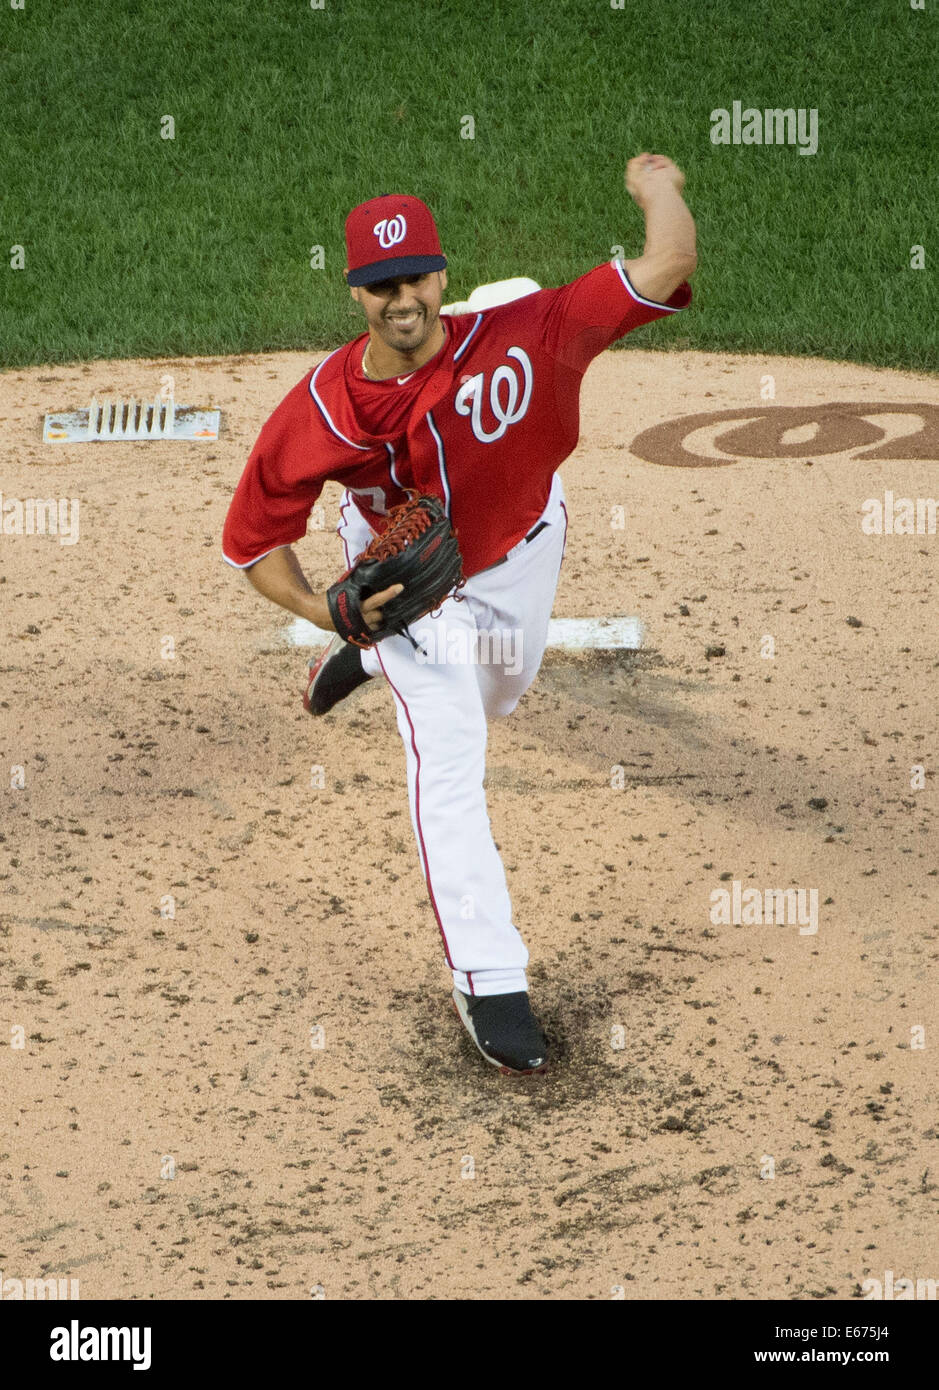 Washington, DC, USA. 16th Aug, 2014. Washington Nationals starting pitcher Gio Gonzalez (47) delivers a pitch against the Pittsburgh Pirates during the third inning of their game at Nationals Park in Washington, D.C, Saturday, August 16, 2014. Credit:  Harry E. Walker/ZUMA Wire/Alamy Live News Stock Photo